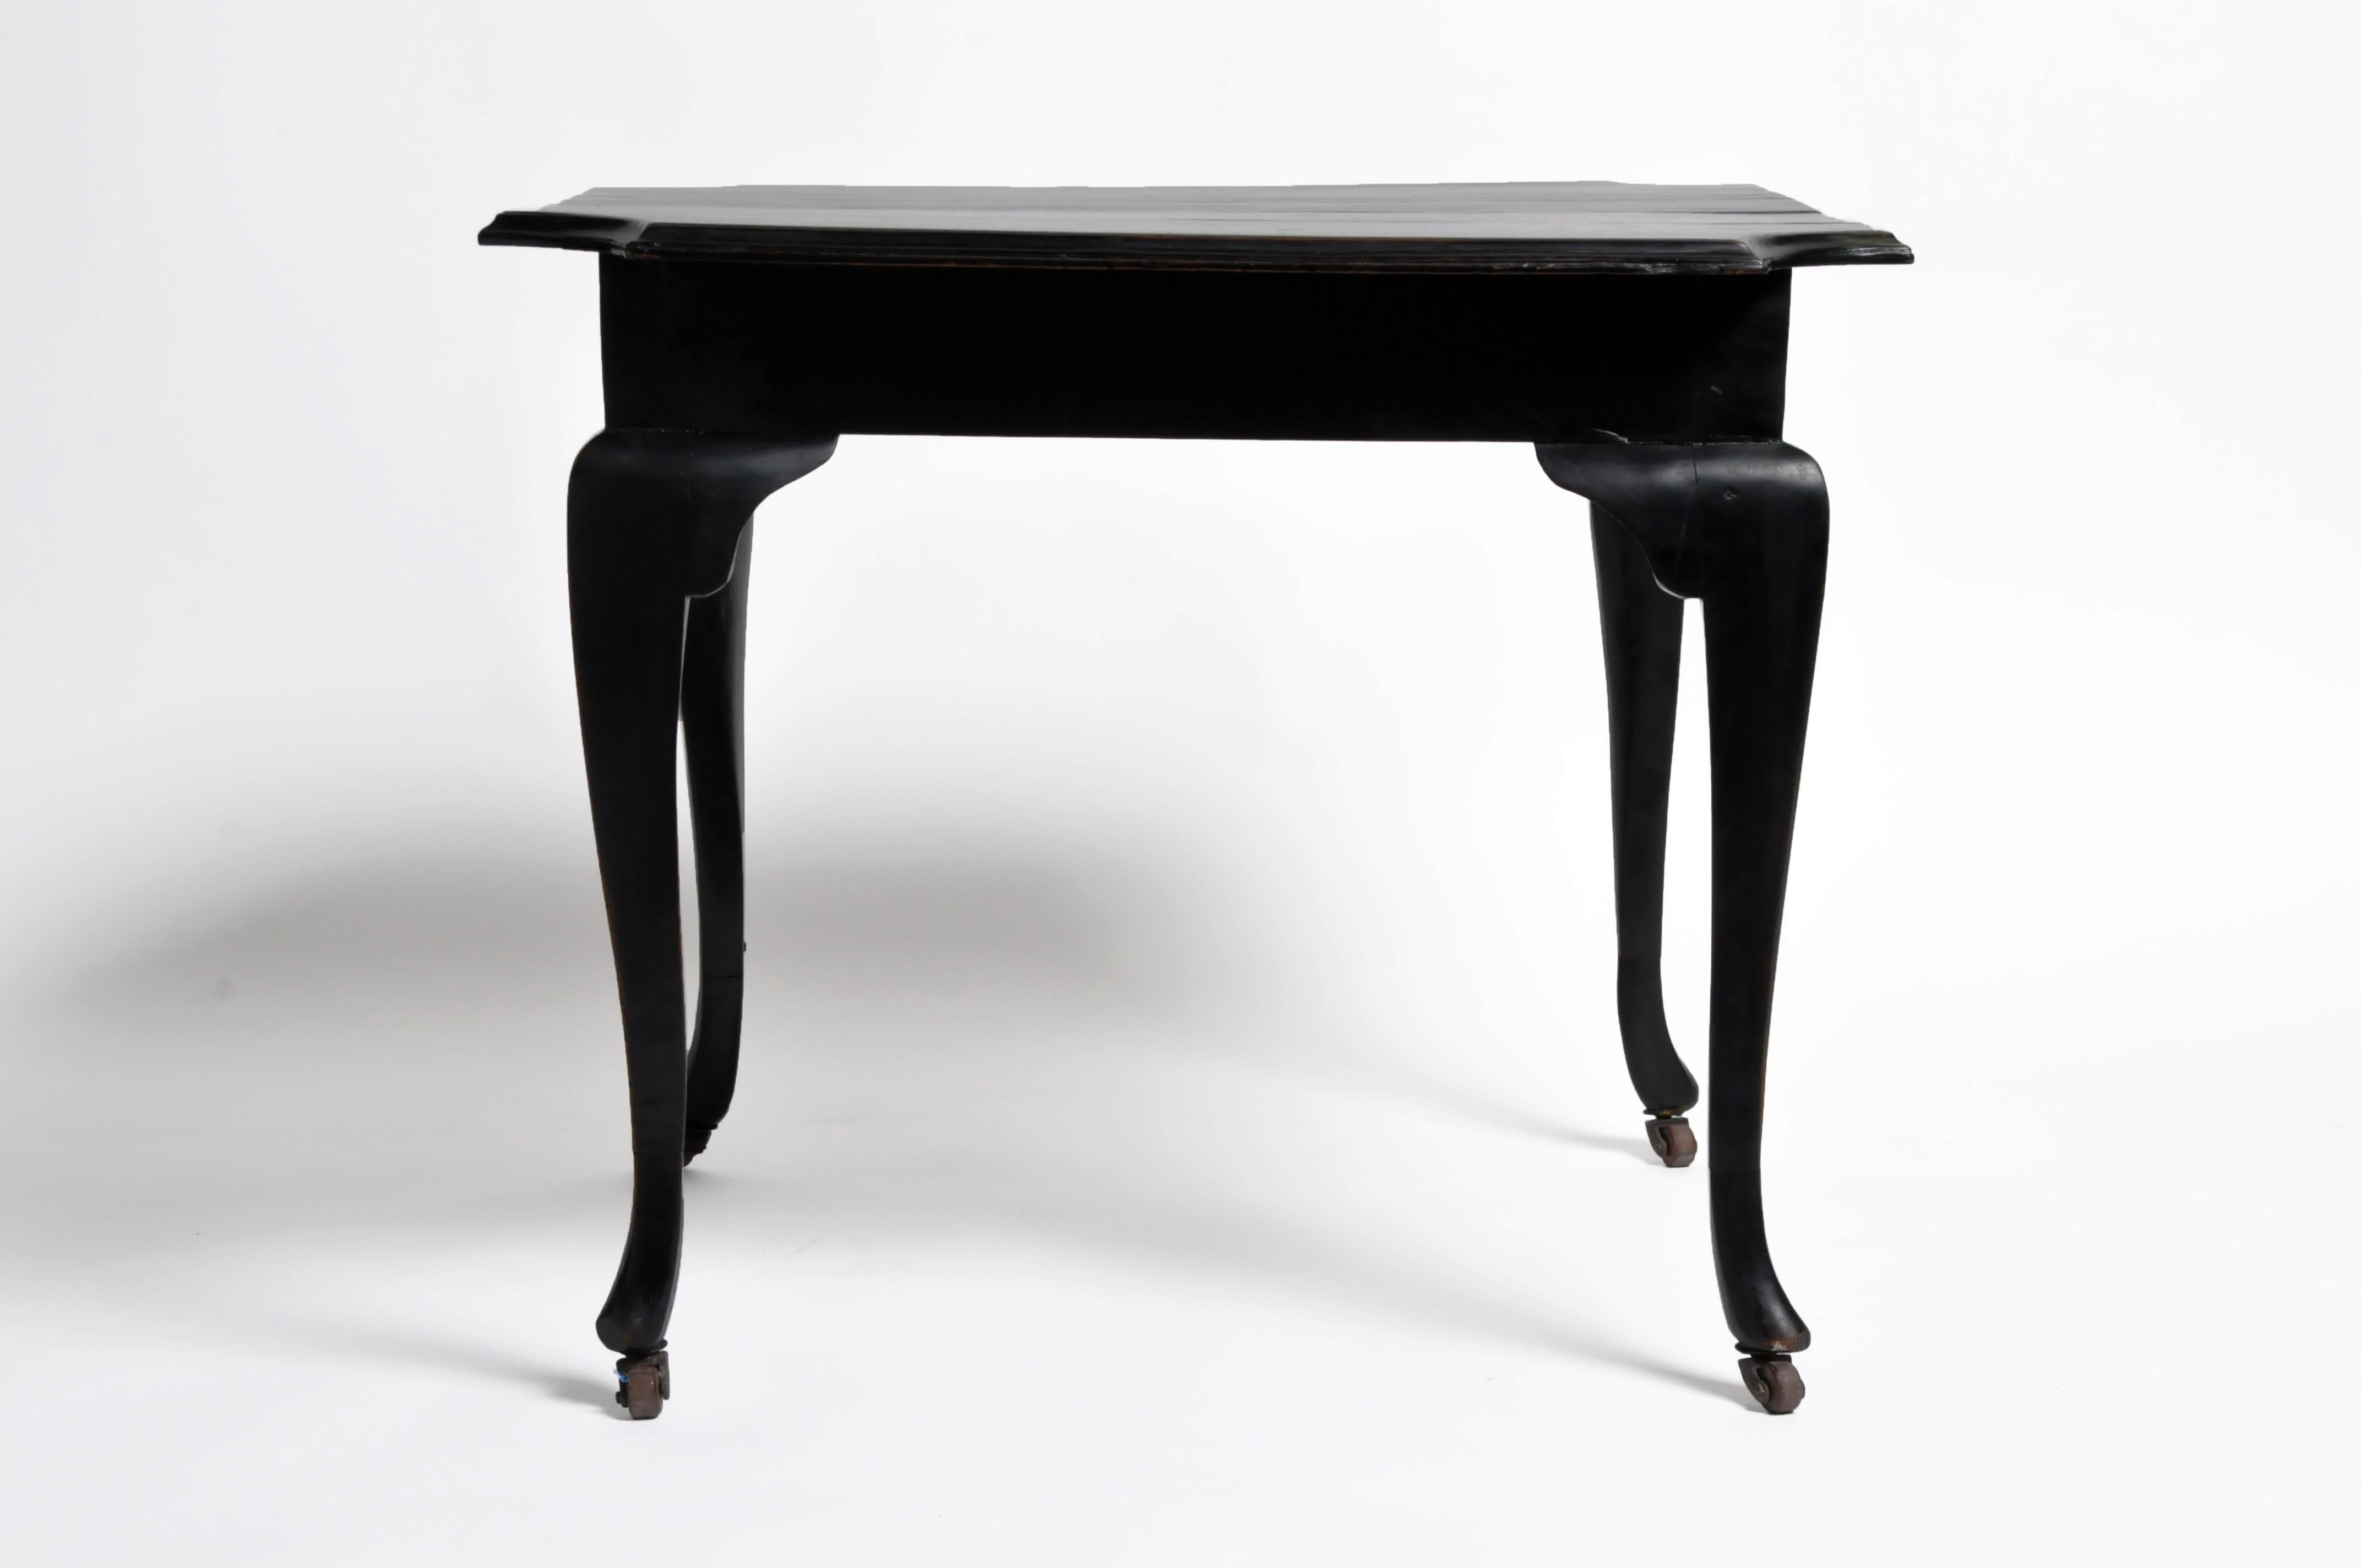 This British Colonial Art Deco tea table is from Yangon and was made from teak wood, circa 1940. It features a new black lacquer finish and casters on all four legs.